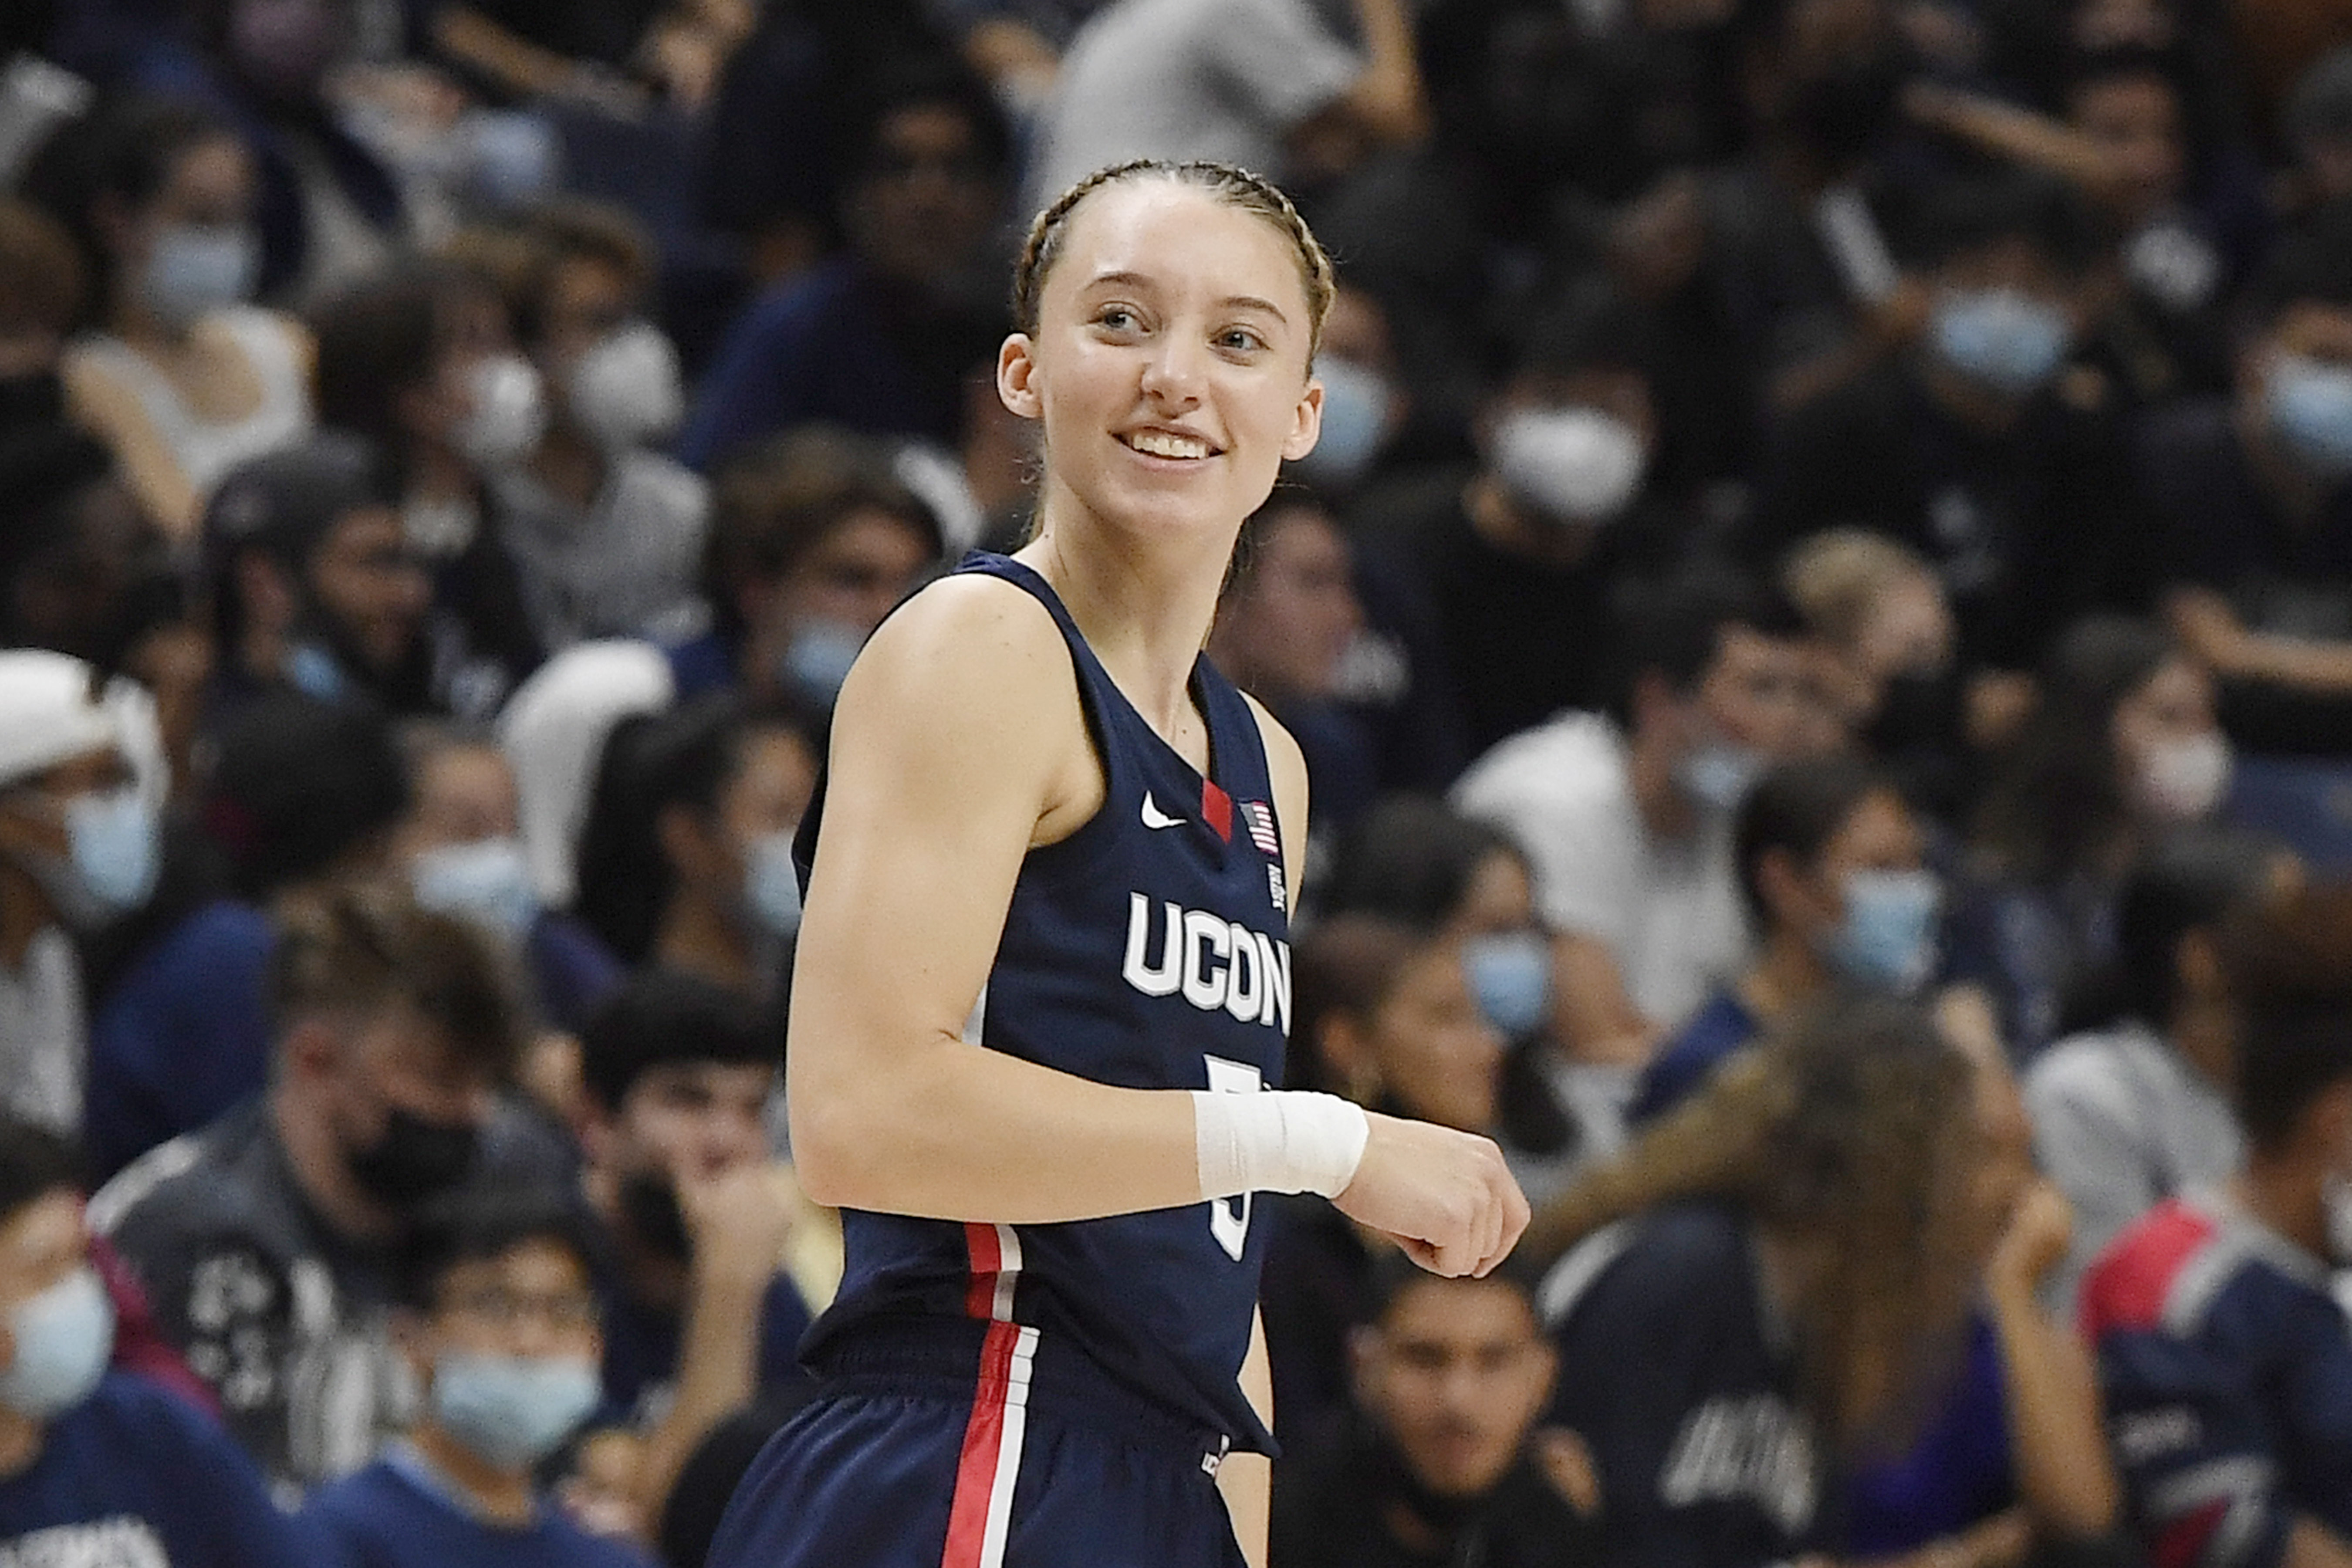 Paige Bueckers, UConn: The Huskies' freshman basketball star is